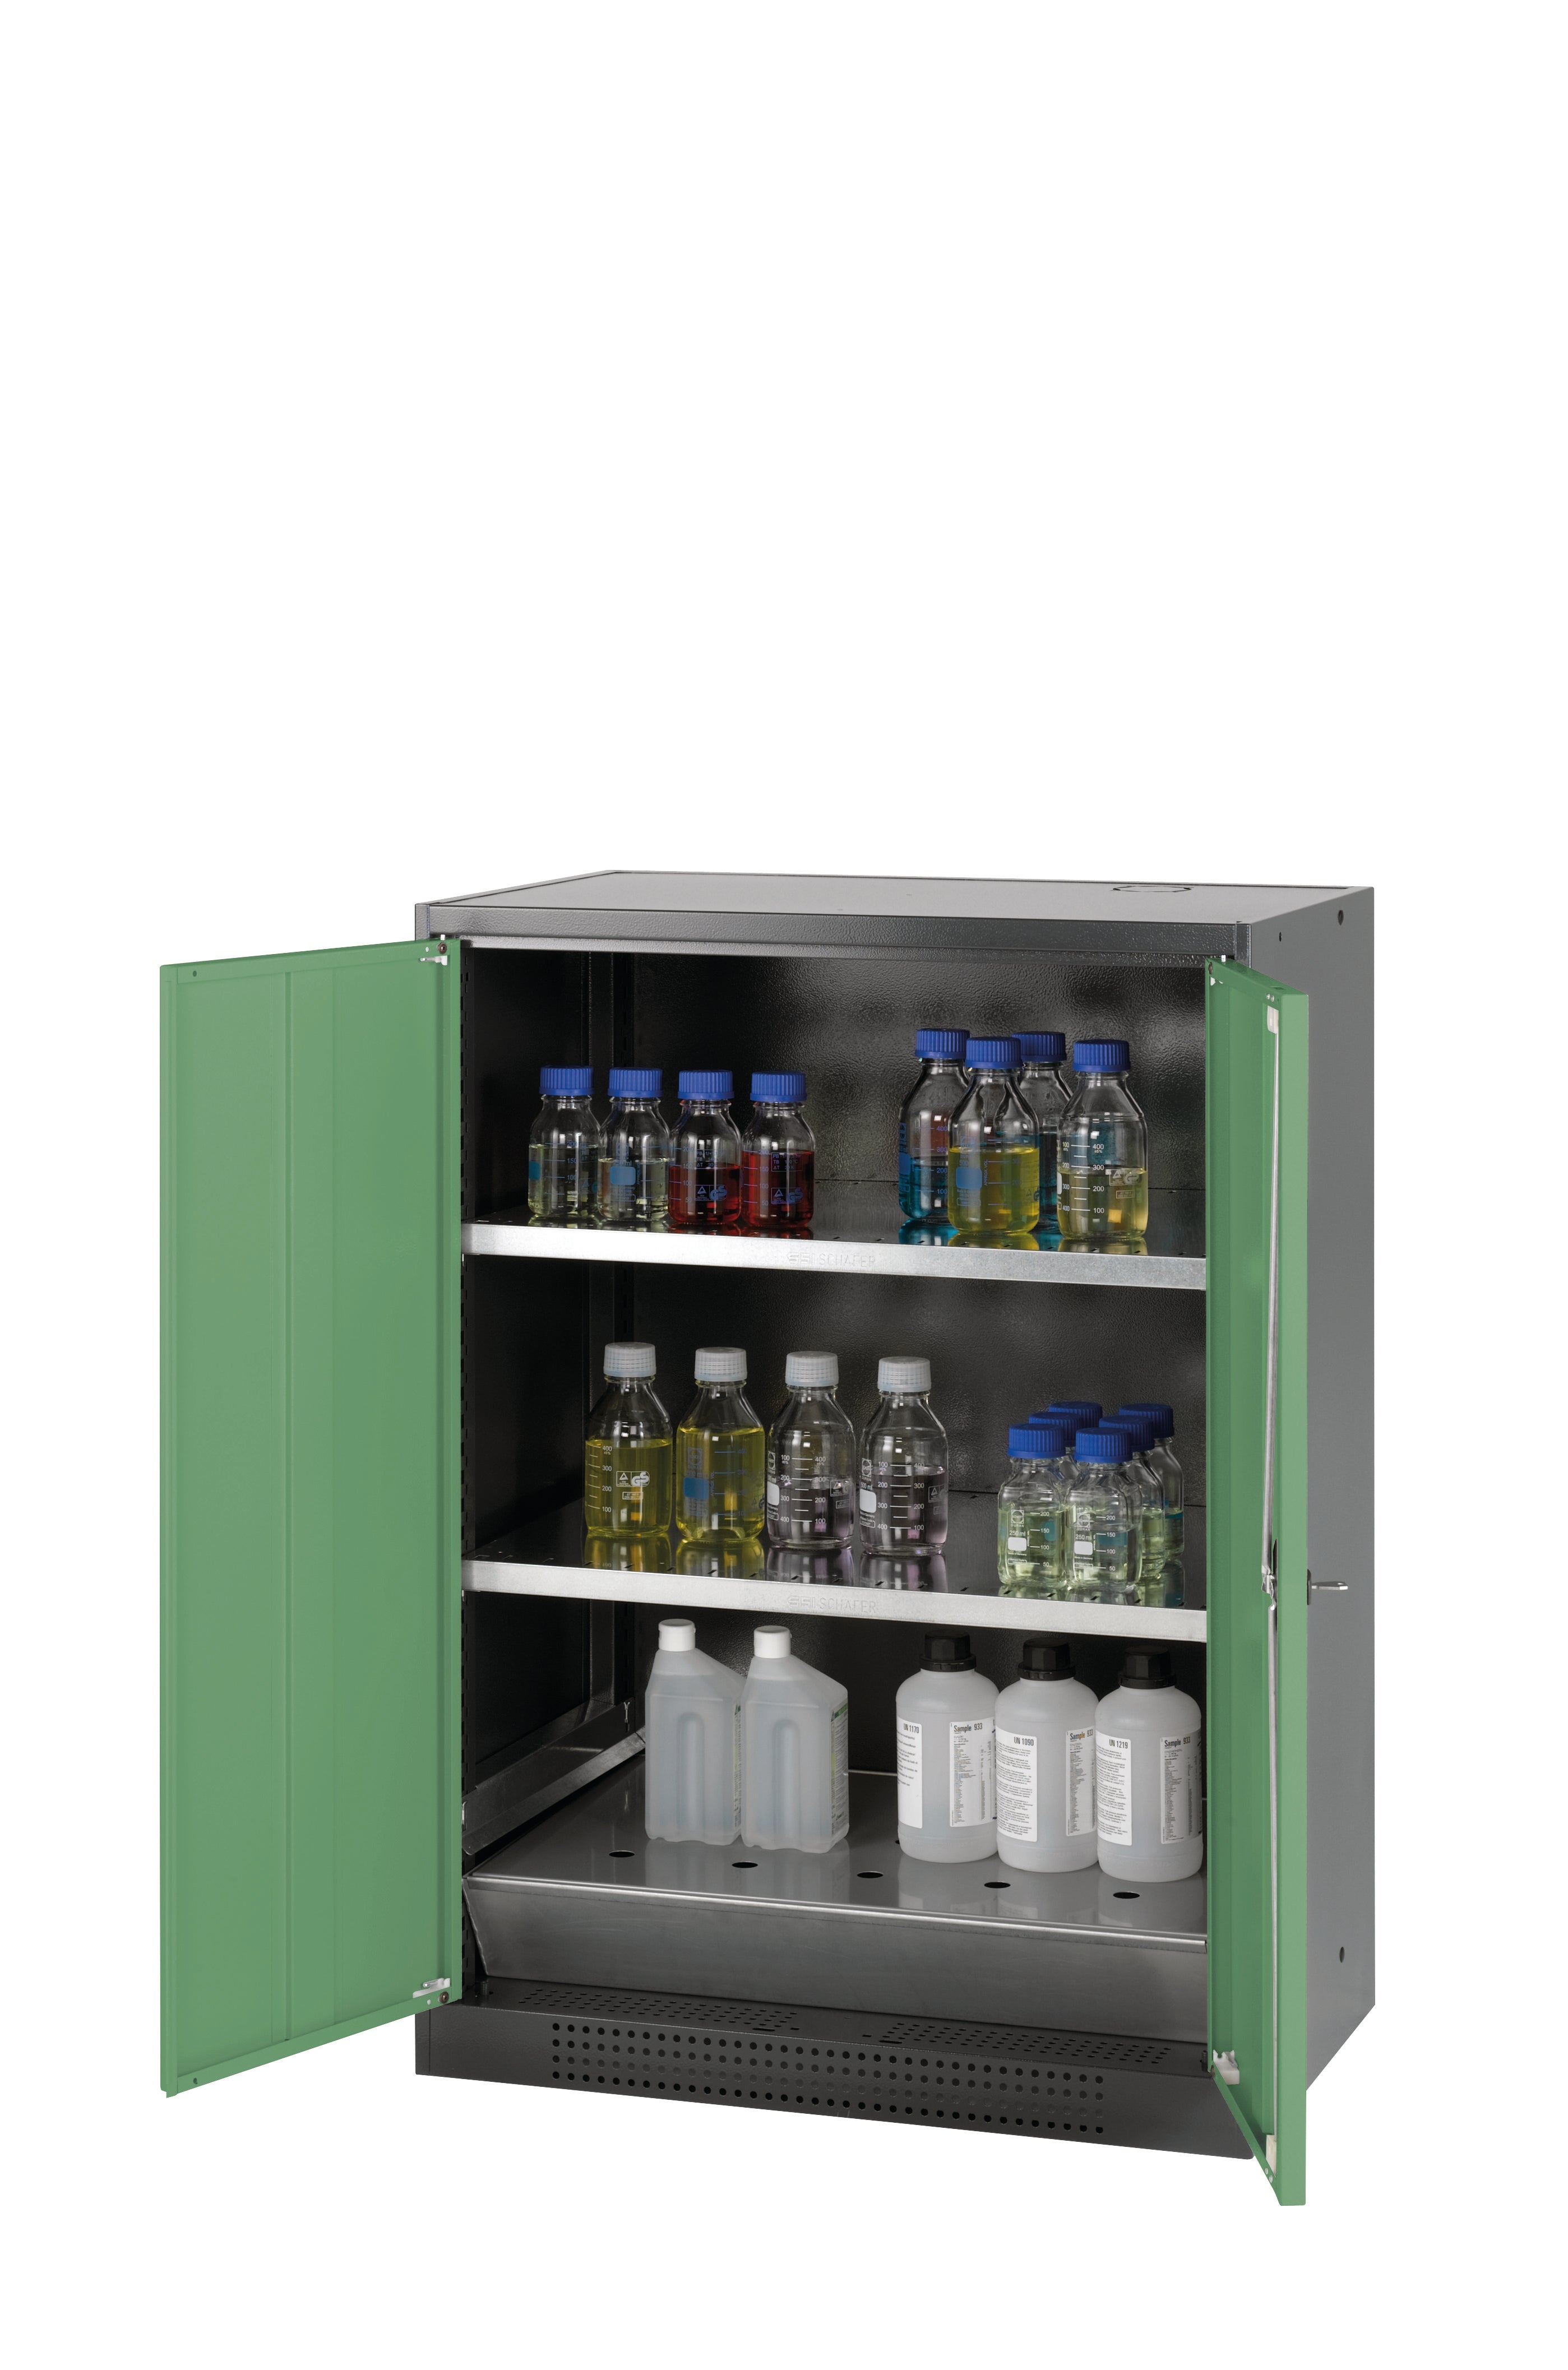 Chemical cabinet CS-CLASSIC model CS.110.081 in reseda green RAL 6011 with 2x standard shelves (sheet steel)